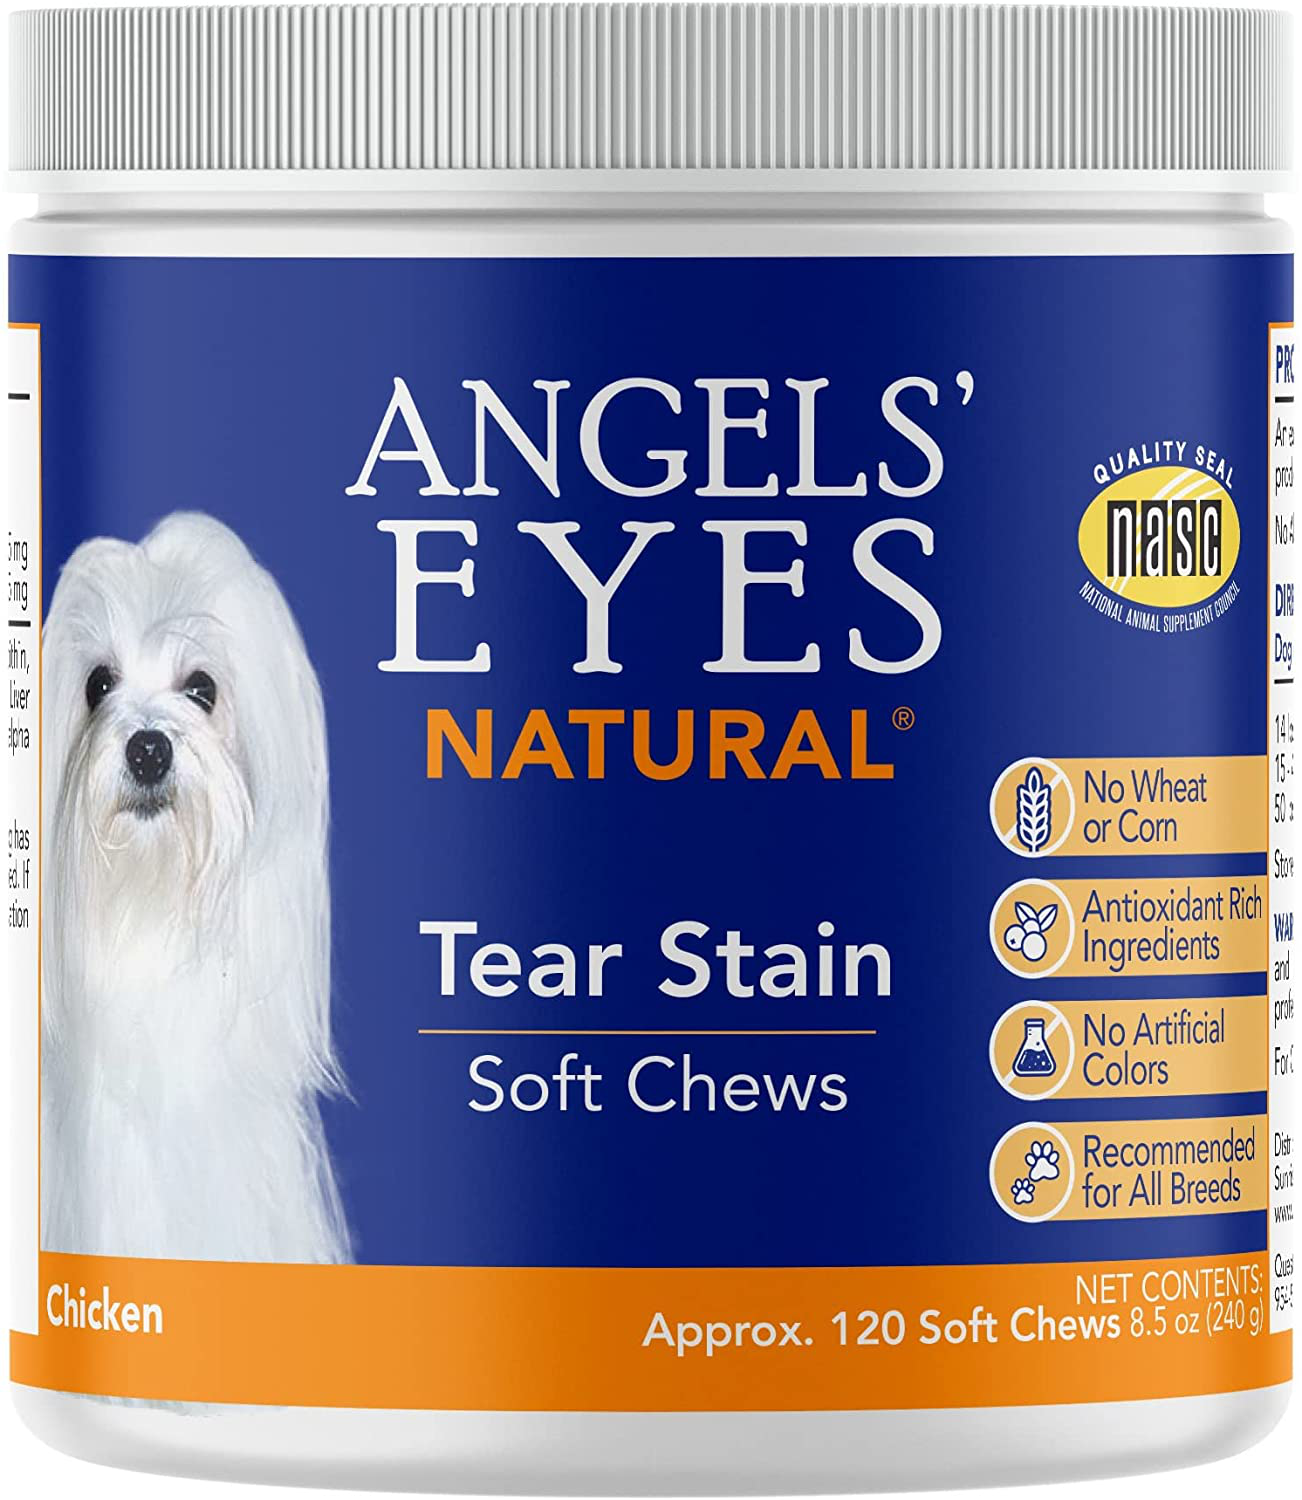 Angel'S Eyes NATURAL Tear Stain Prevention Soft Chews for Dogs - 120 Ct - Chicken Formula (AENSC120D)